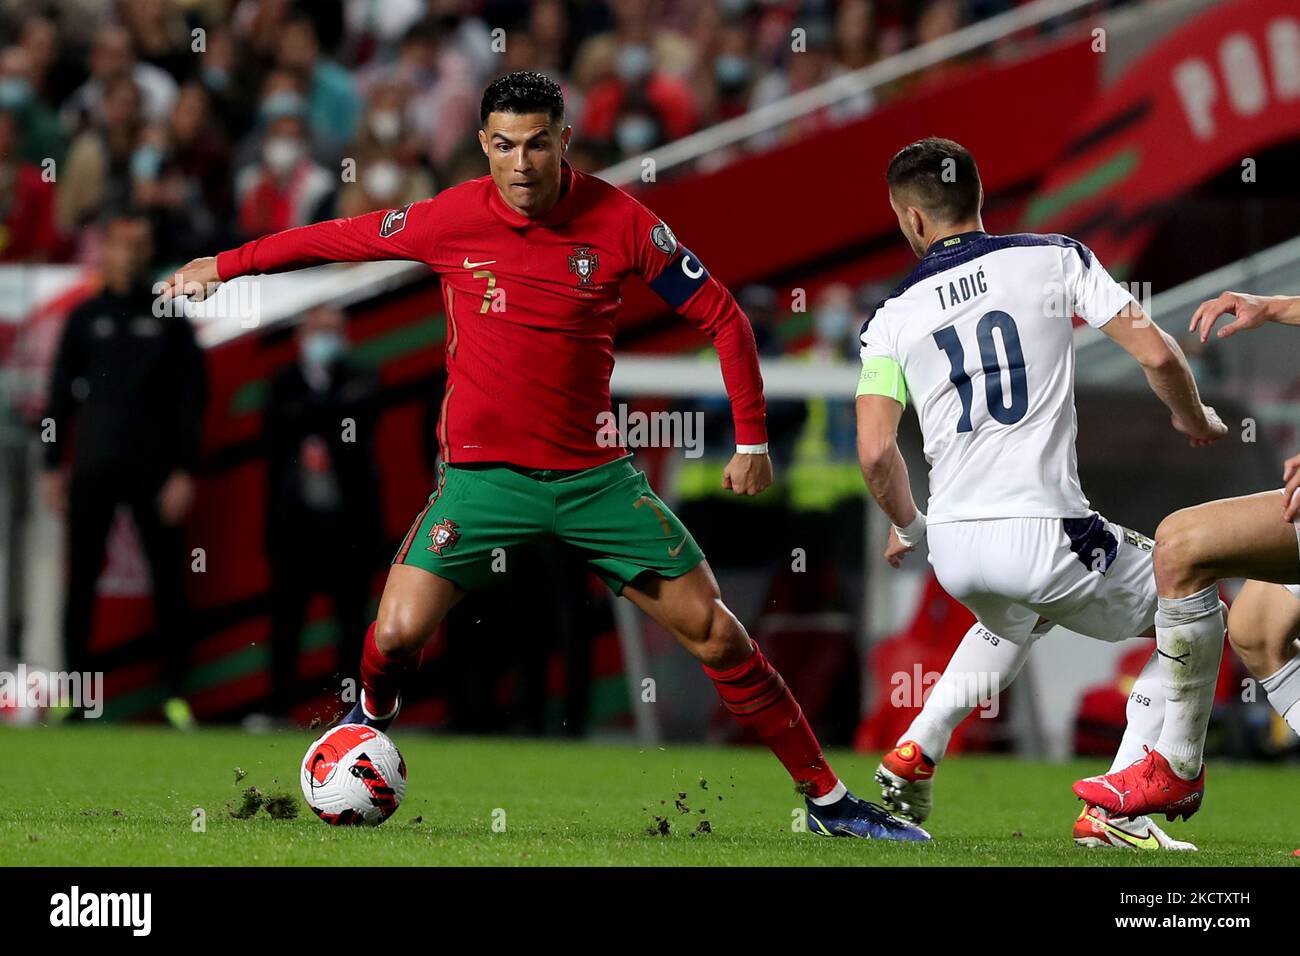 Portugal's forward Cristiano Ronaldo (L) vies with Serbia's midfielder Dusan Tadic during the FIFA World Cup Qatar 2022 qualification group A football match between Portugal and Serbia at the Luz stadium in Lisbon, Portugal, on November 14, 2021. (Photo by Pedro FiÃºza/NurPhoto) Stock Photo